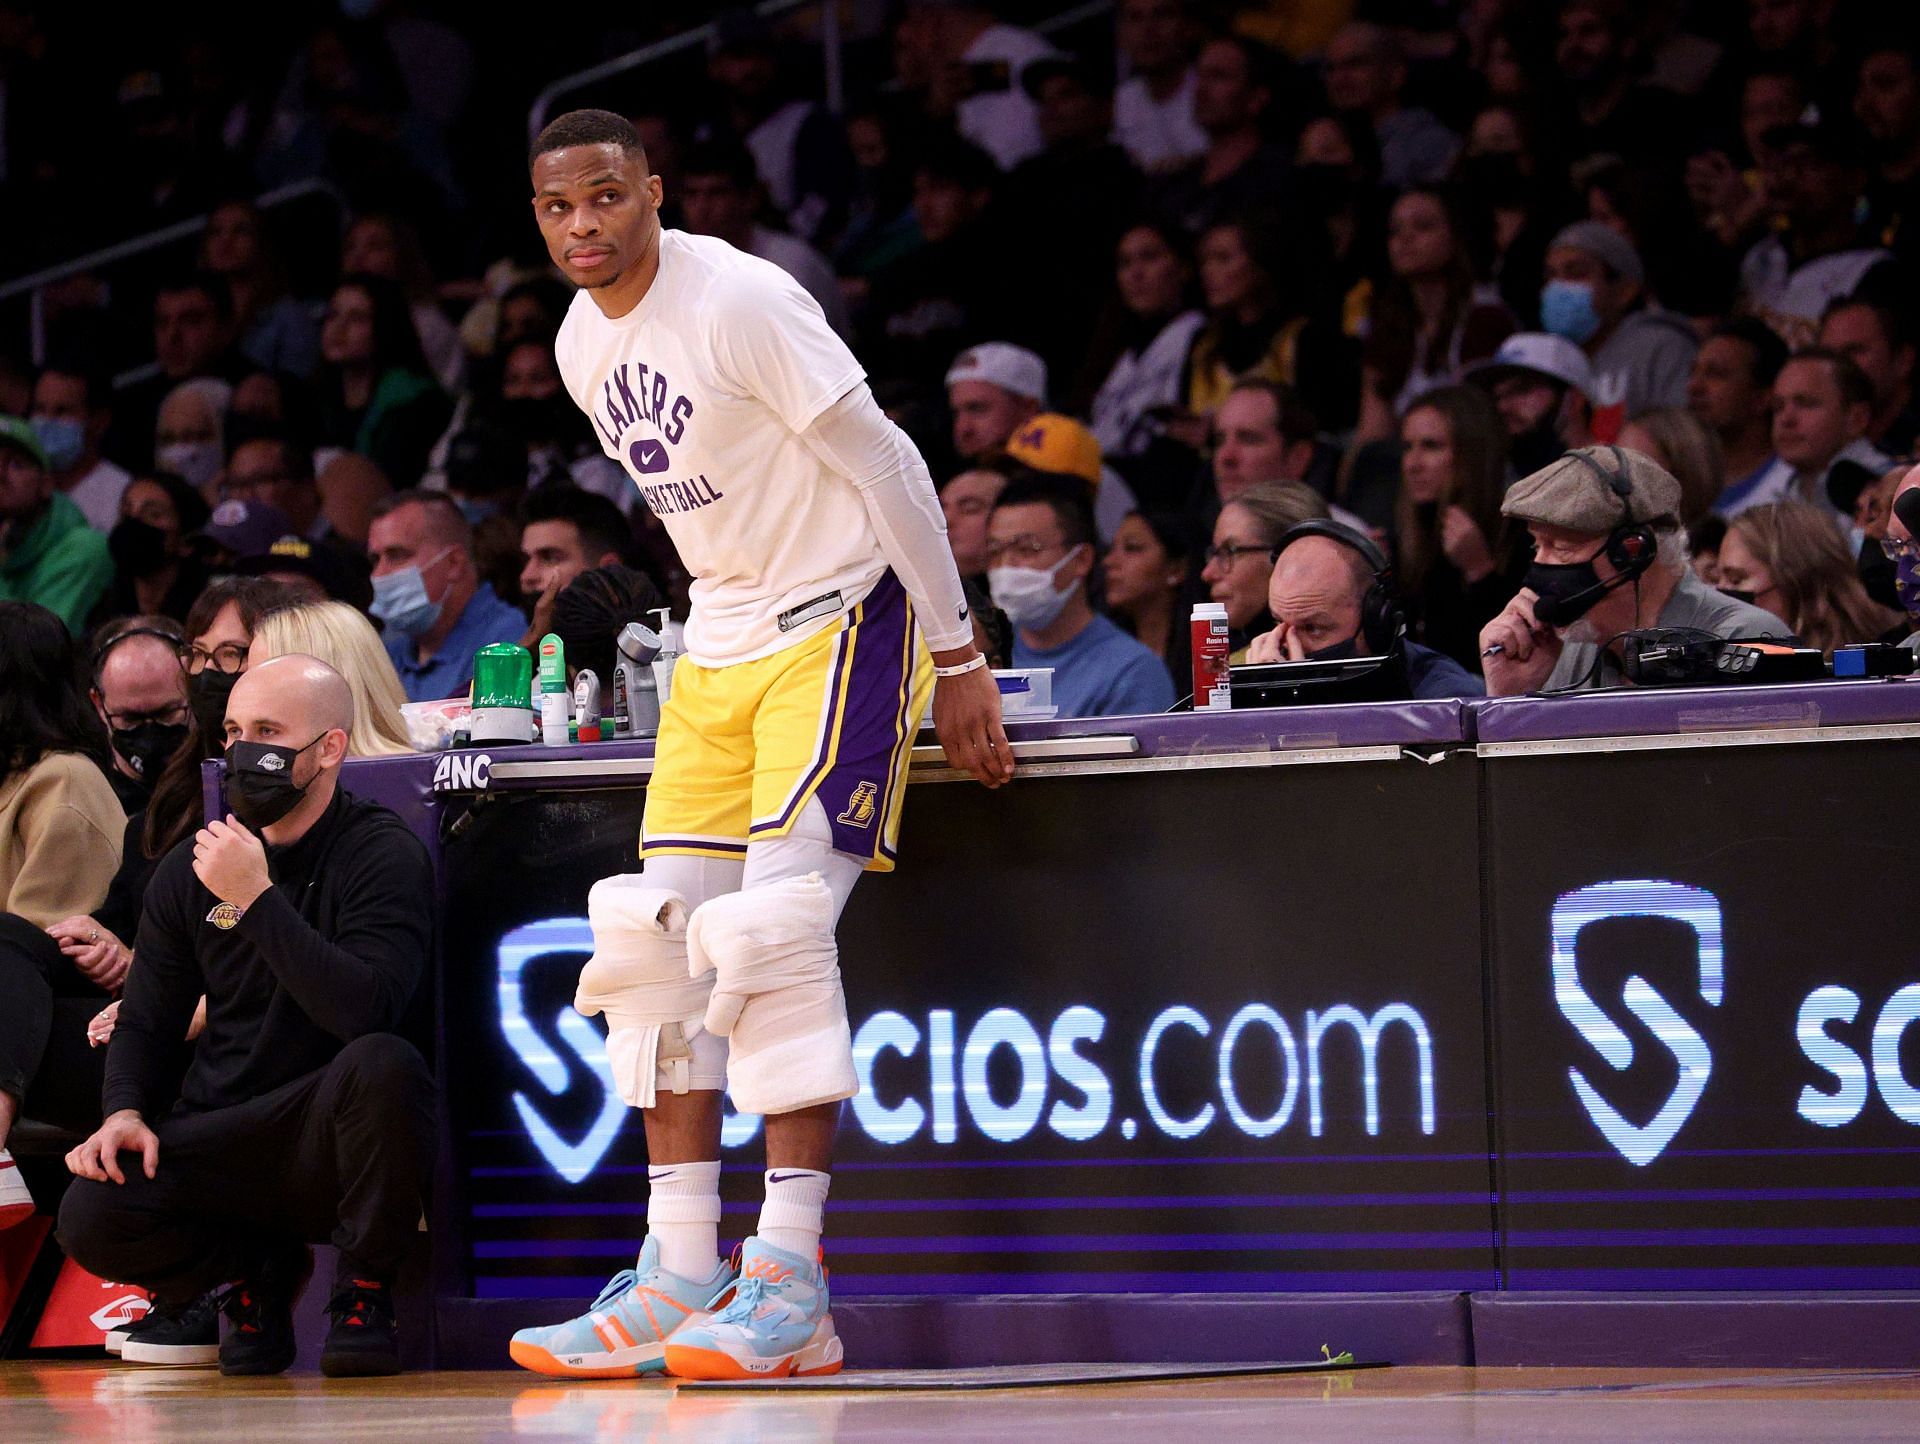 Russell Westbrook will look to bring another championship to the LA Lakers this season.